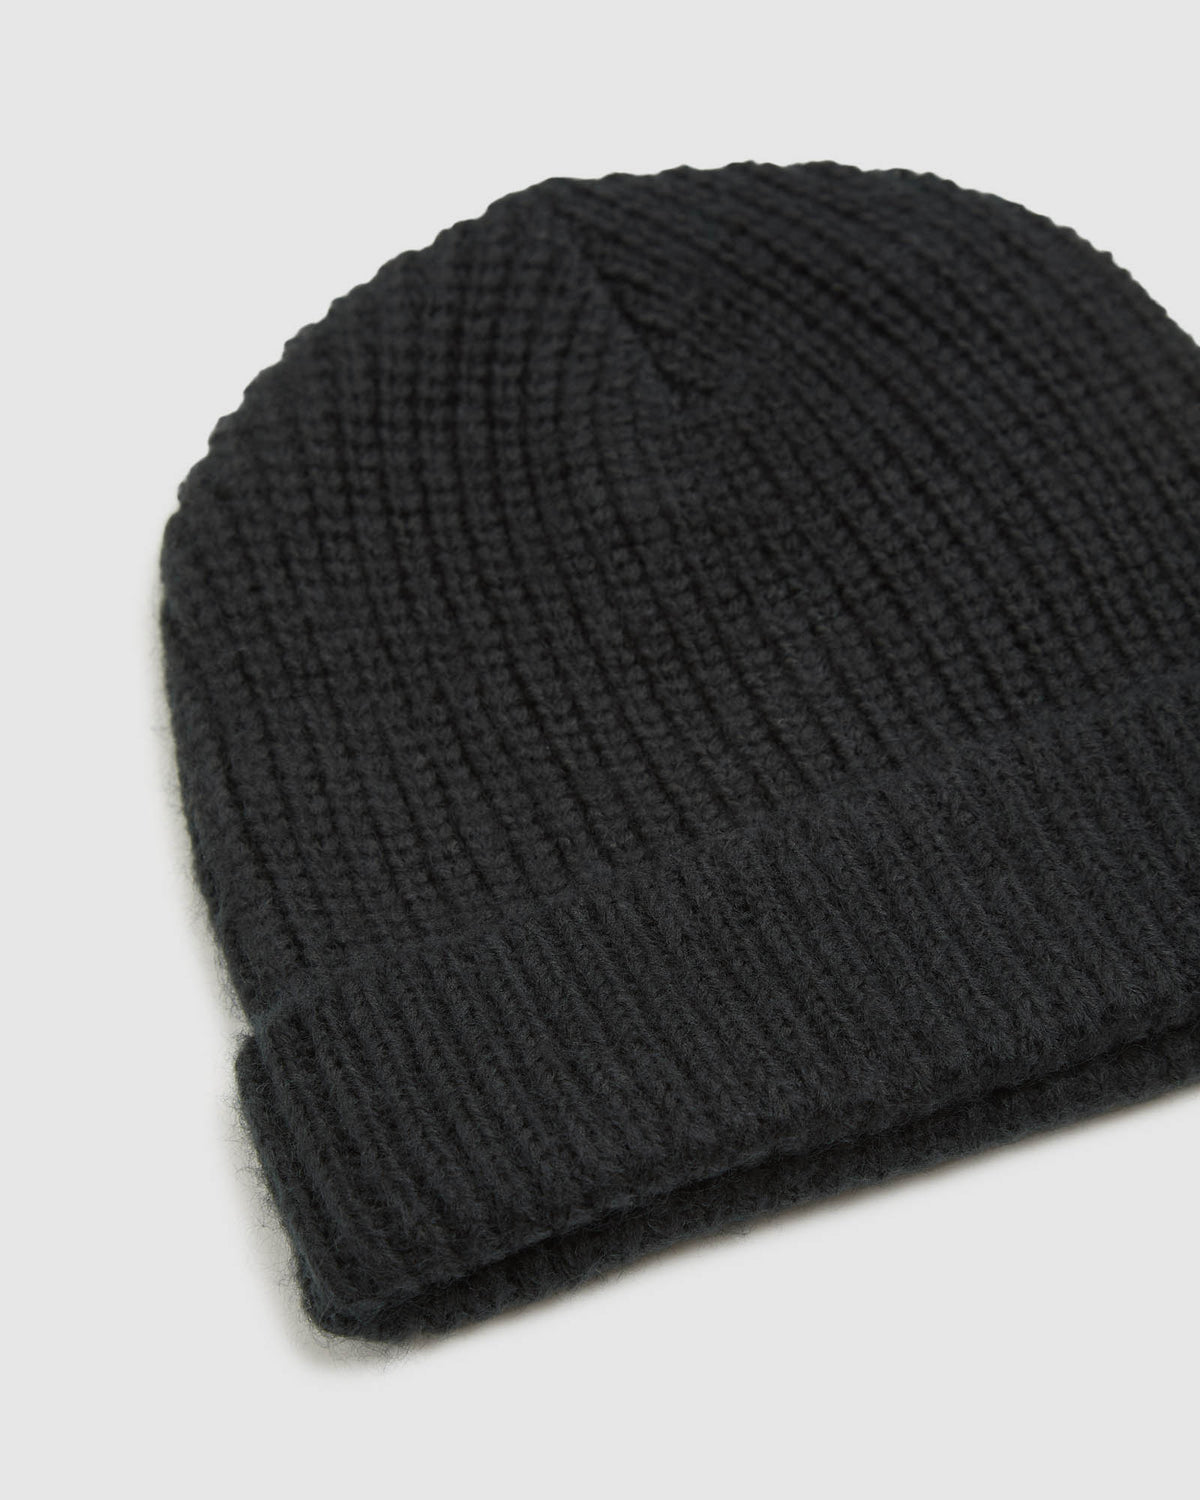 DYLAN KNIT BEANIE MENS ACCESSORIES